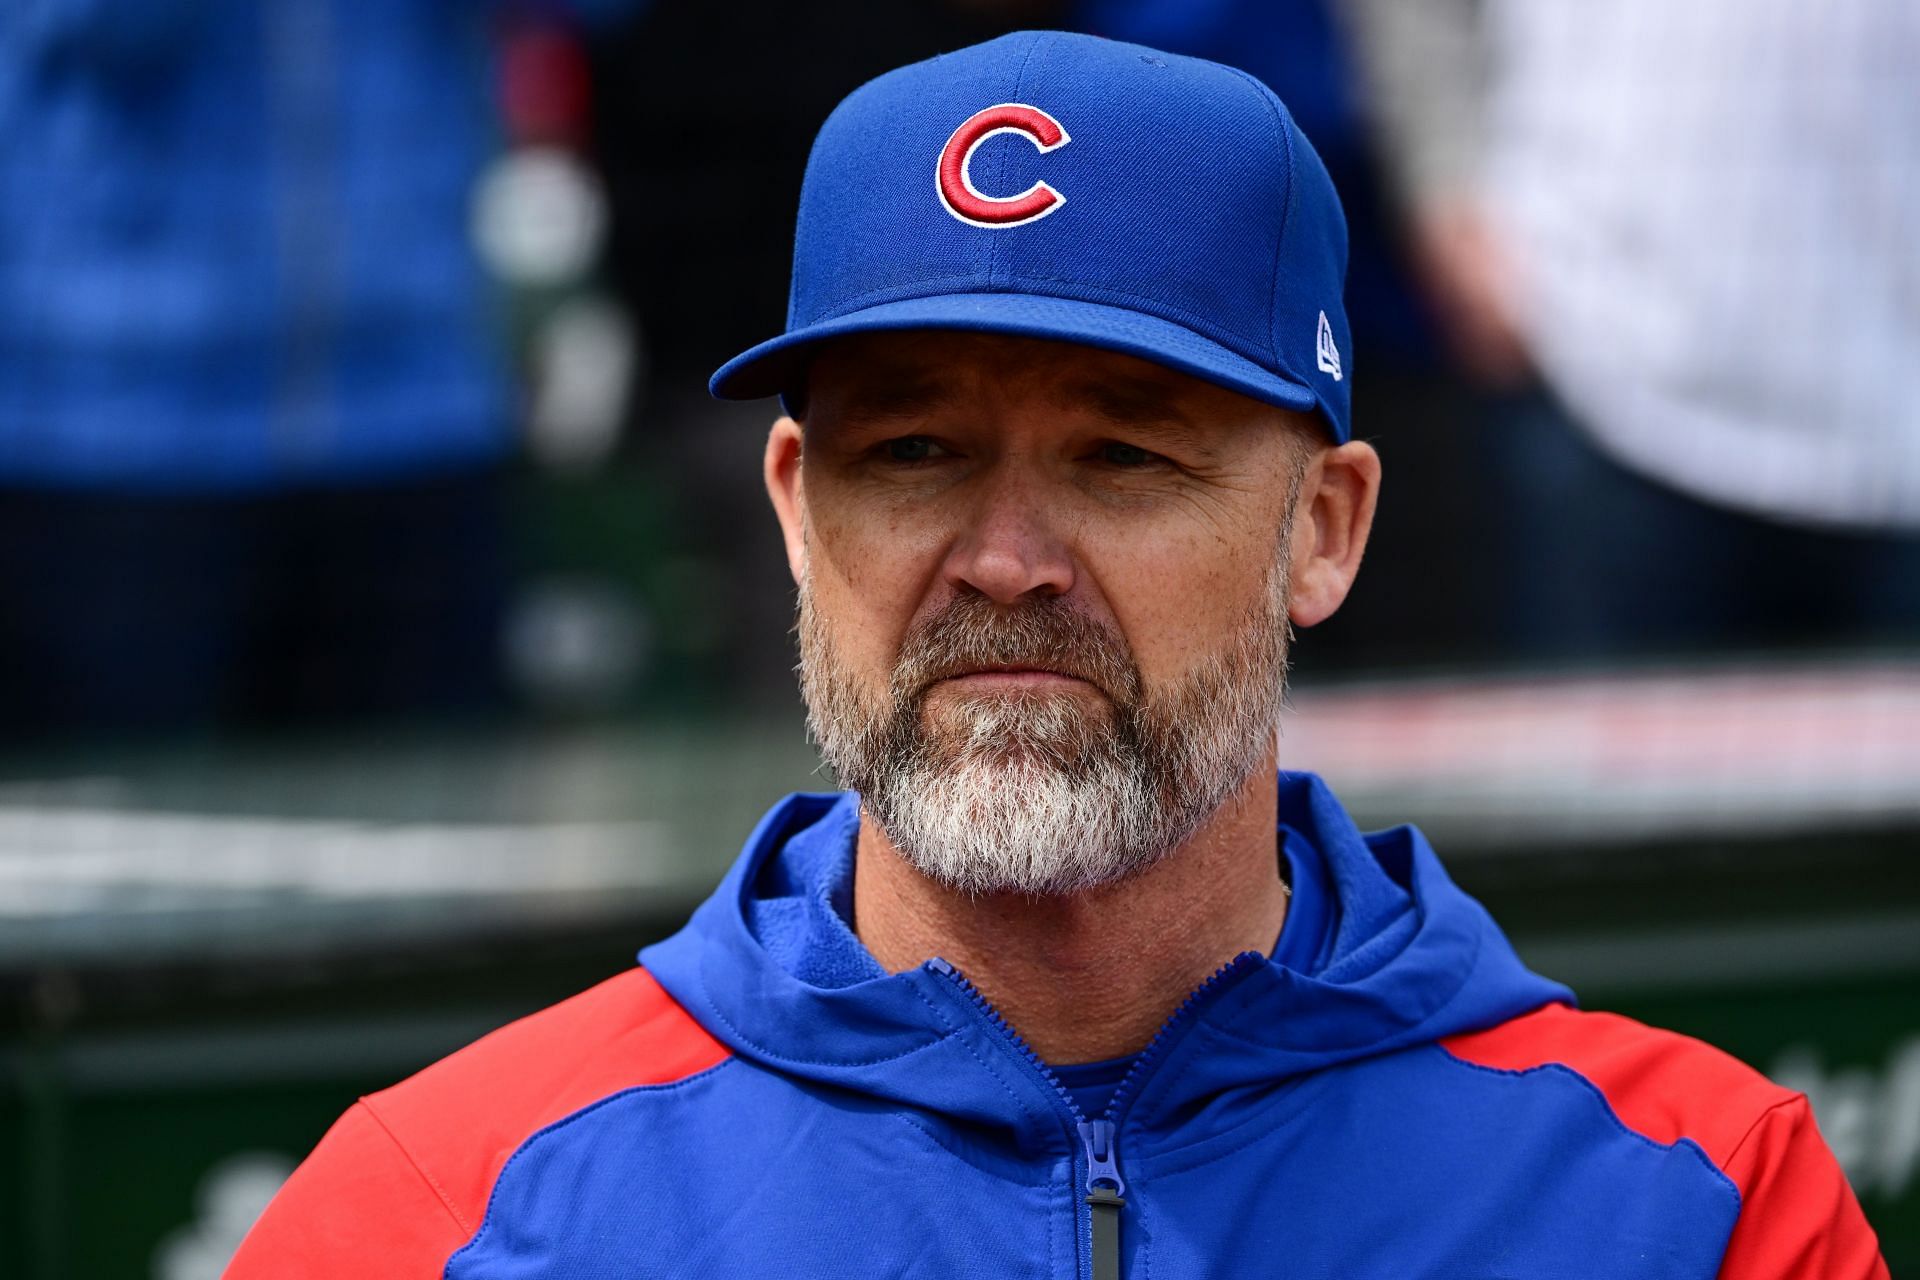 Cubs' Wisdom wiser after long, harsh road through minors